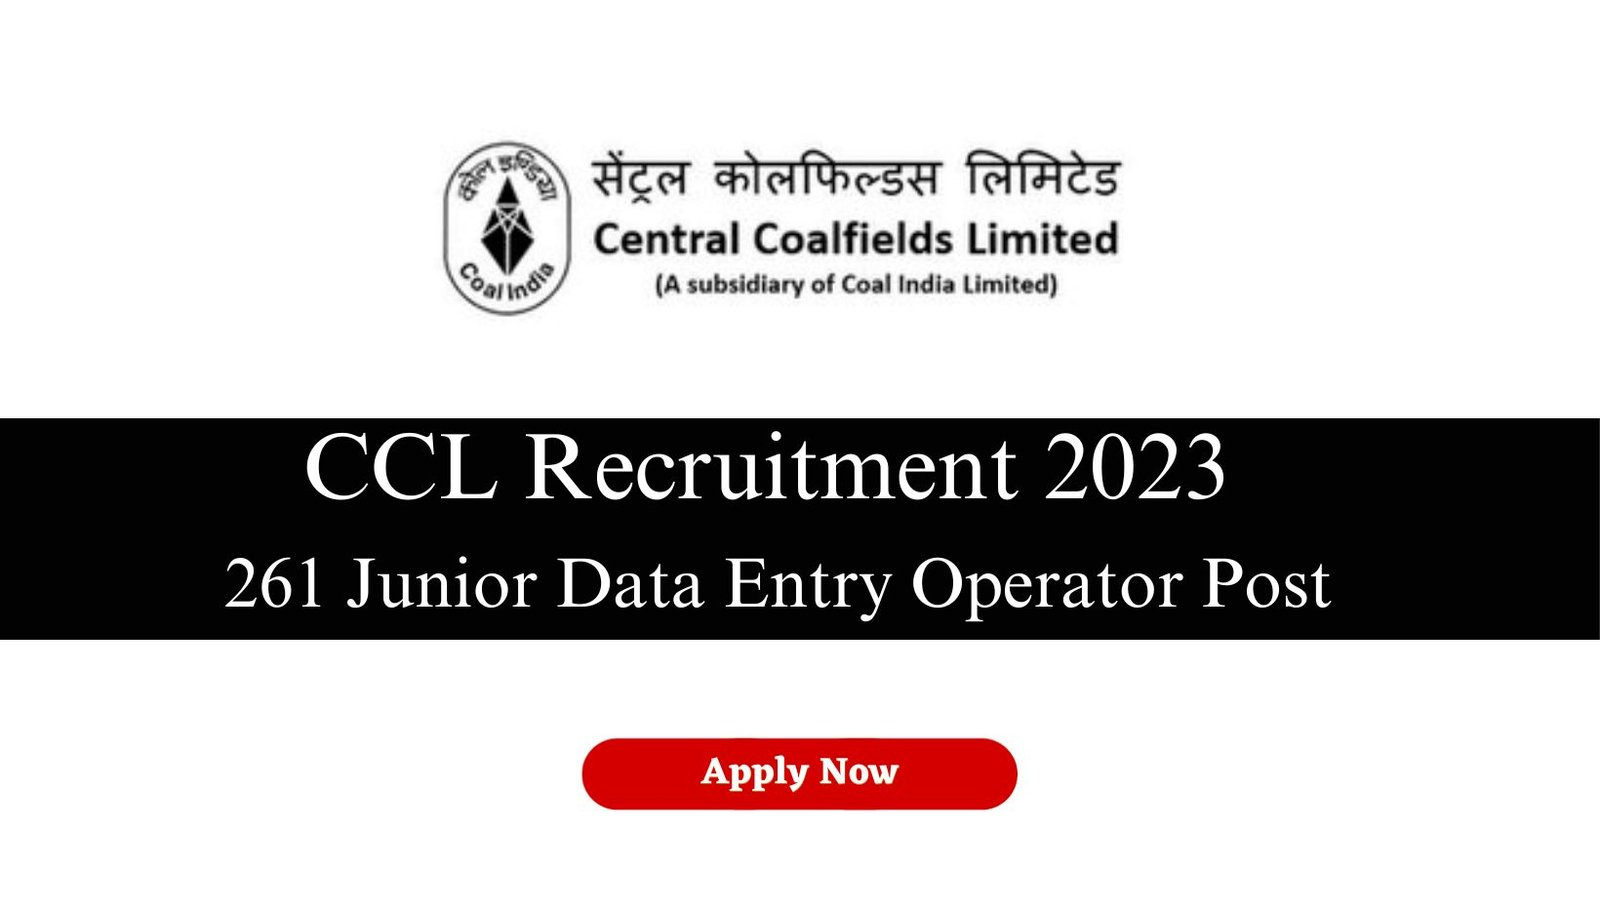 CCL Recruitment 2023 Apply Now for 261 Junior Data Entry Operator Positions